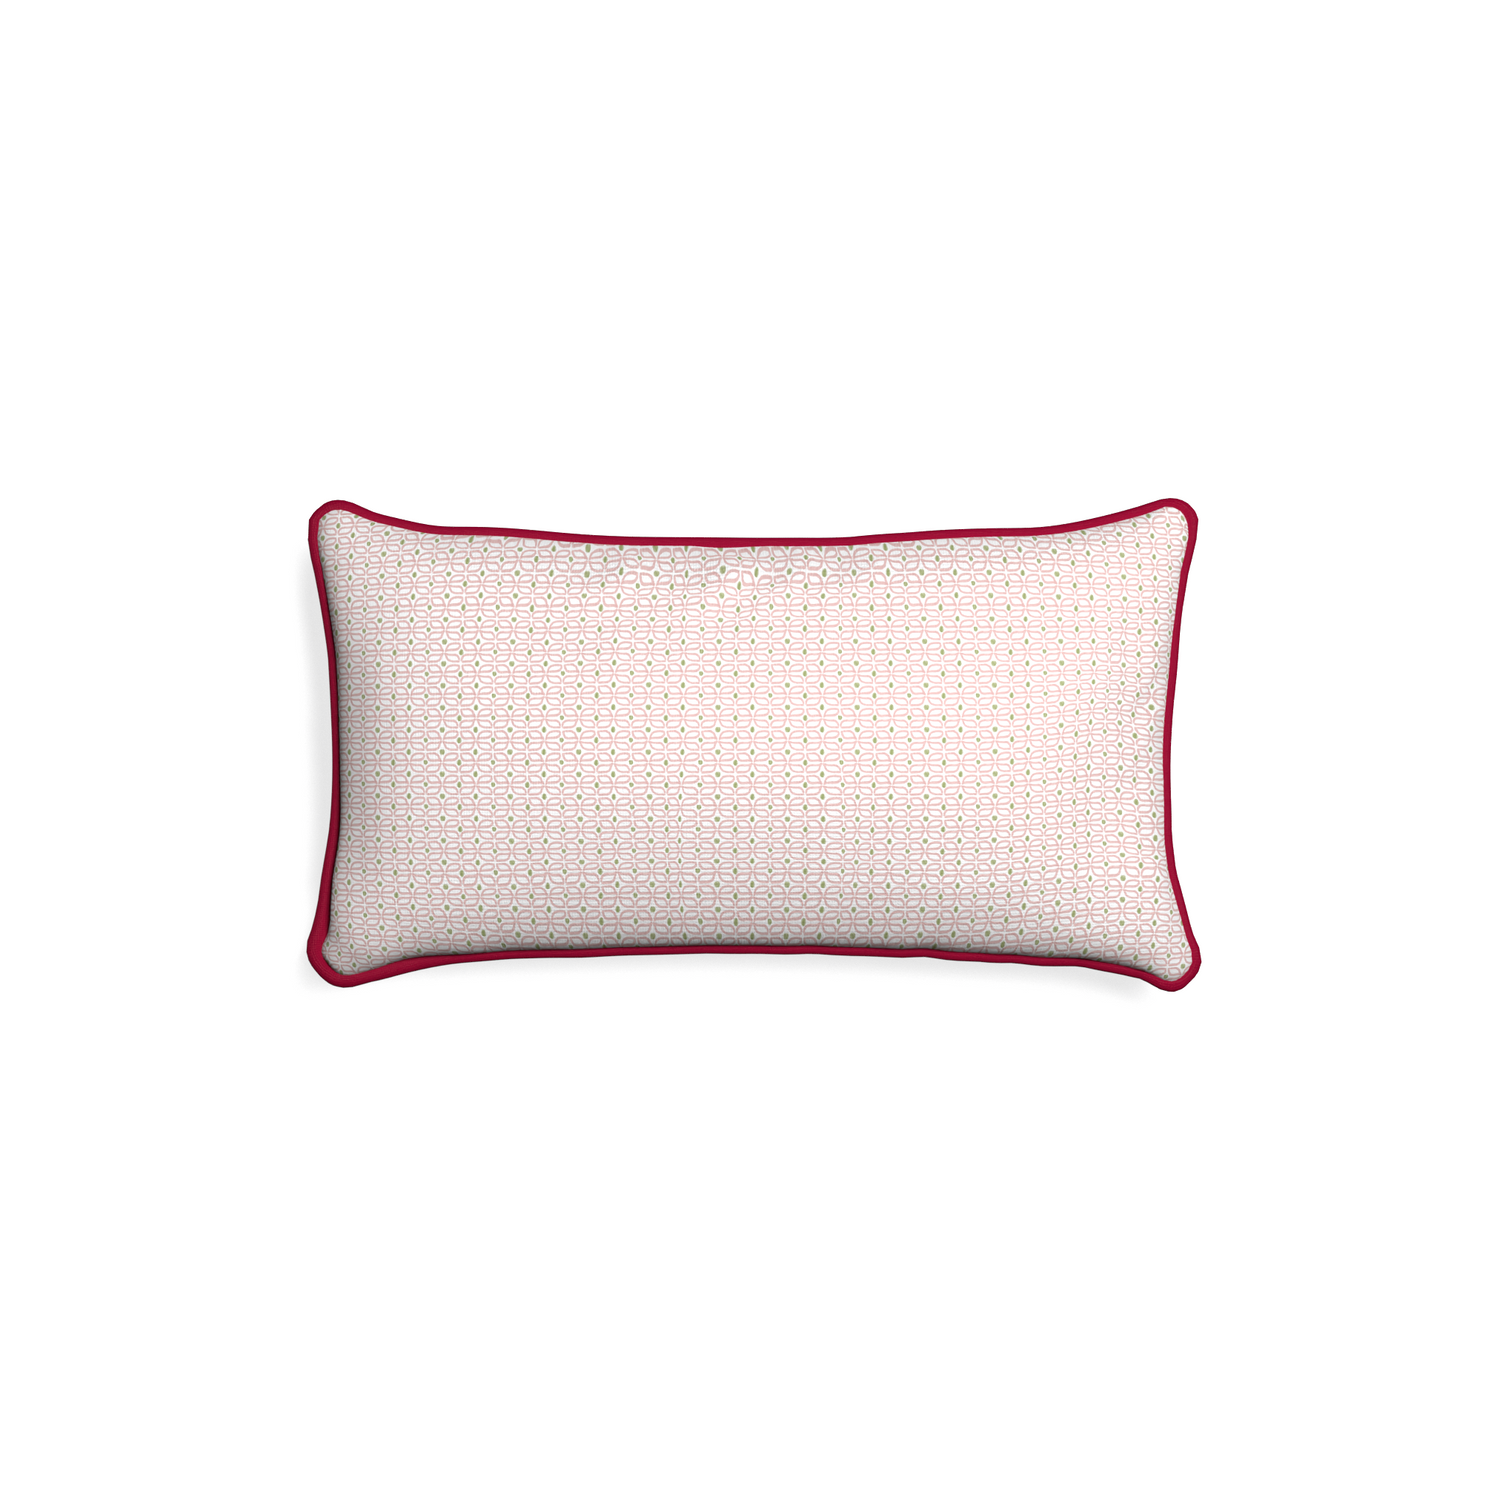 Petite-lumbar loomi pink custom pink geometricpillow with raspberry piping on white background